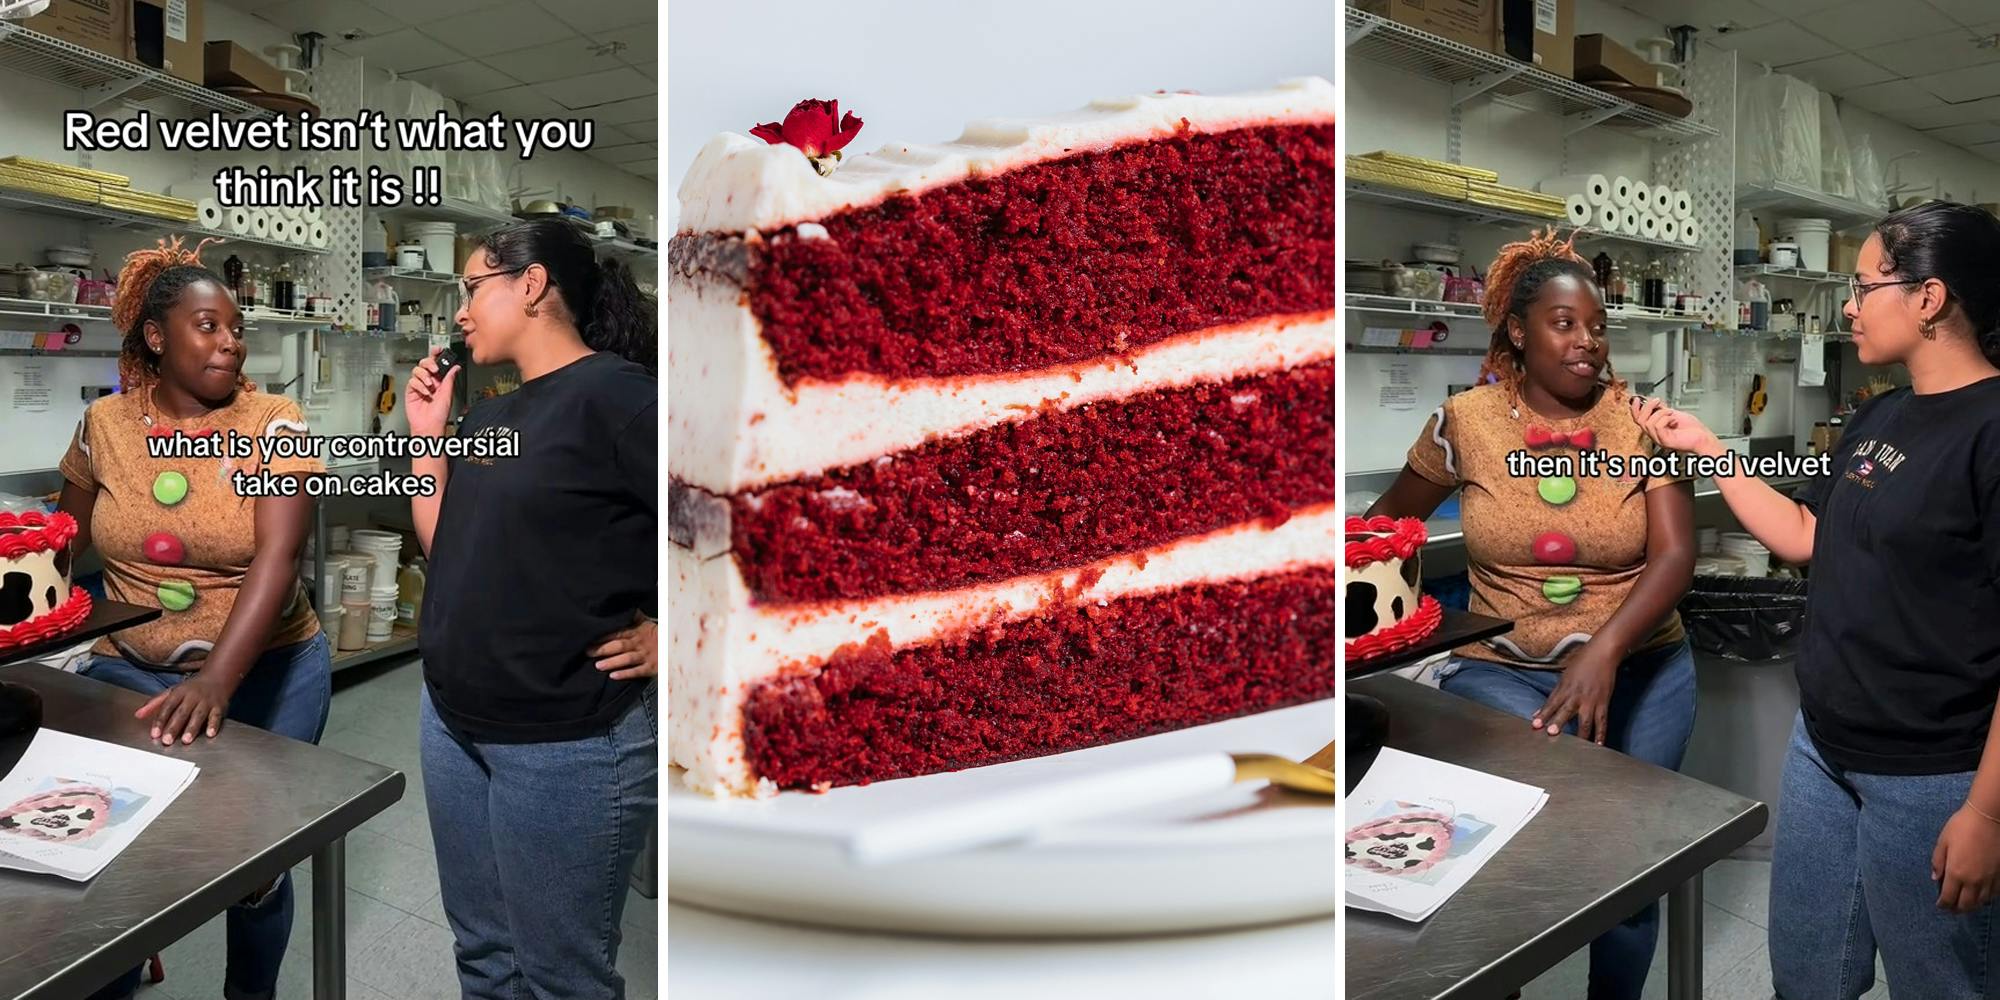 woman asking baker "what is your controversial take on cakes" with caption "Red velvet isn't what you think it is!!" (l) red velvet cake (c) baker with caption "then it's not red velvet" (r)